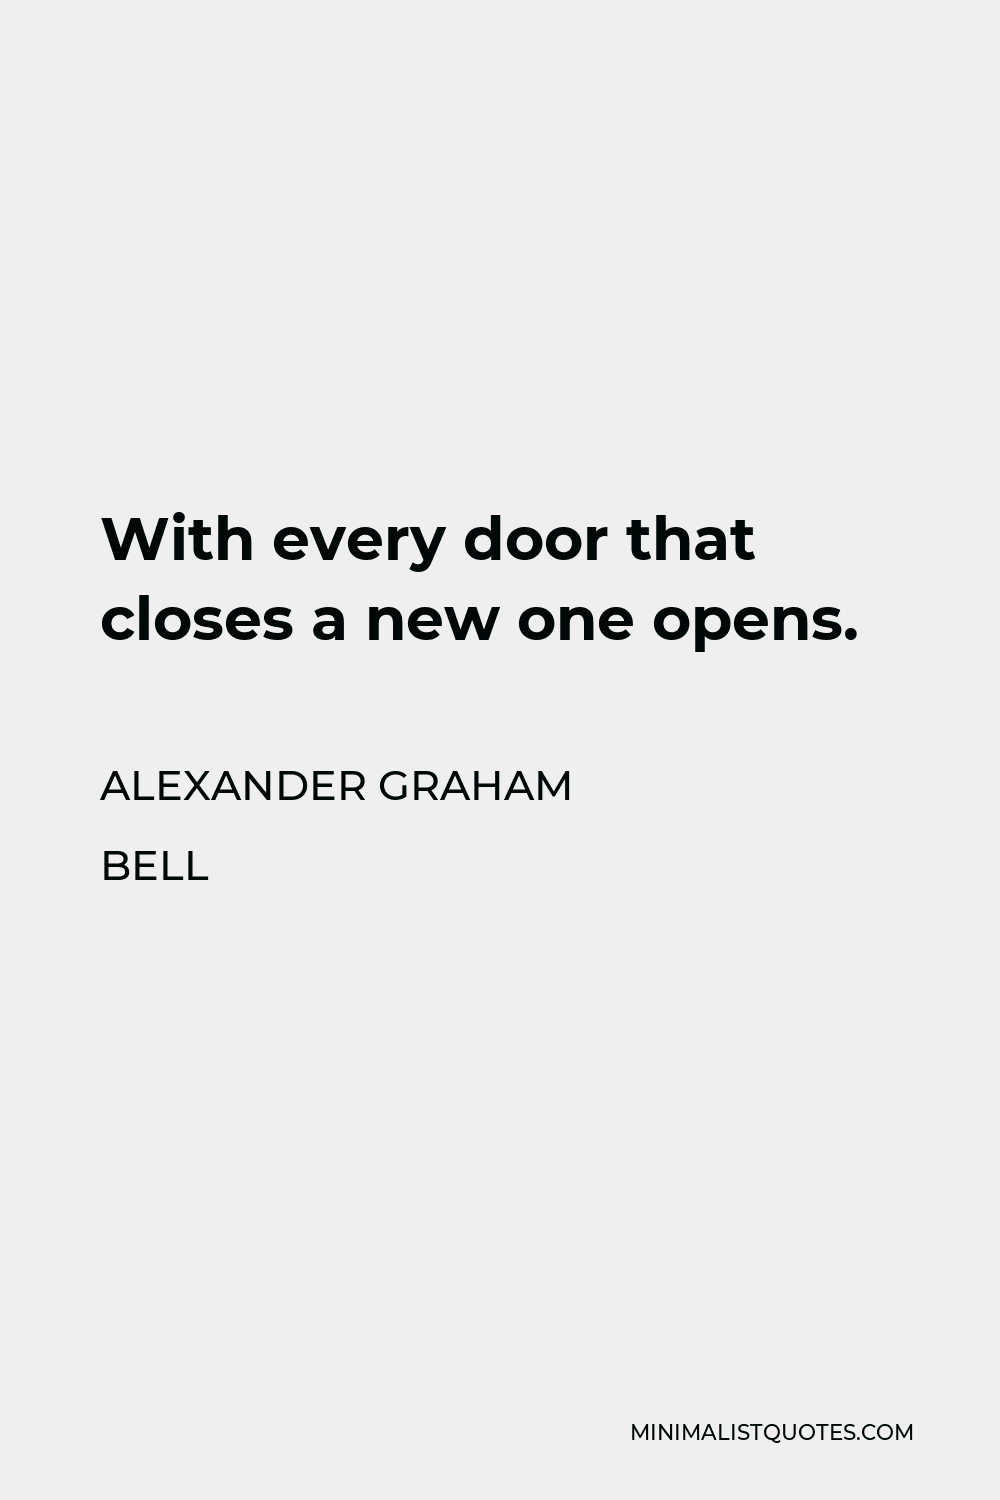 Alexander Graham Bell Quote - With every door that closes a new one opens.